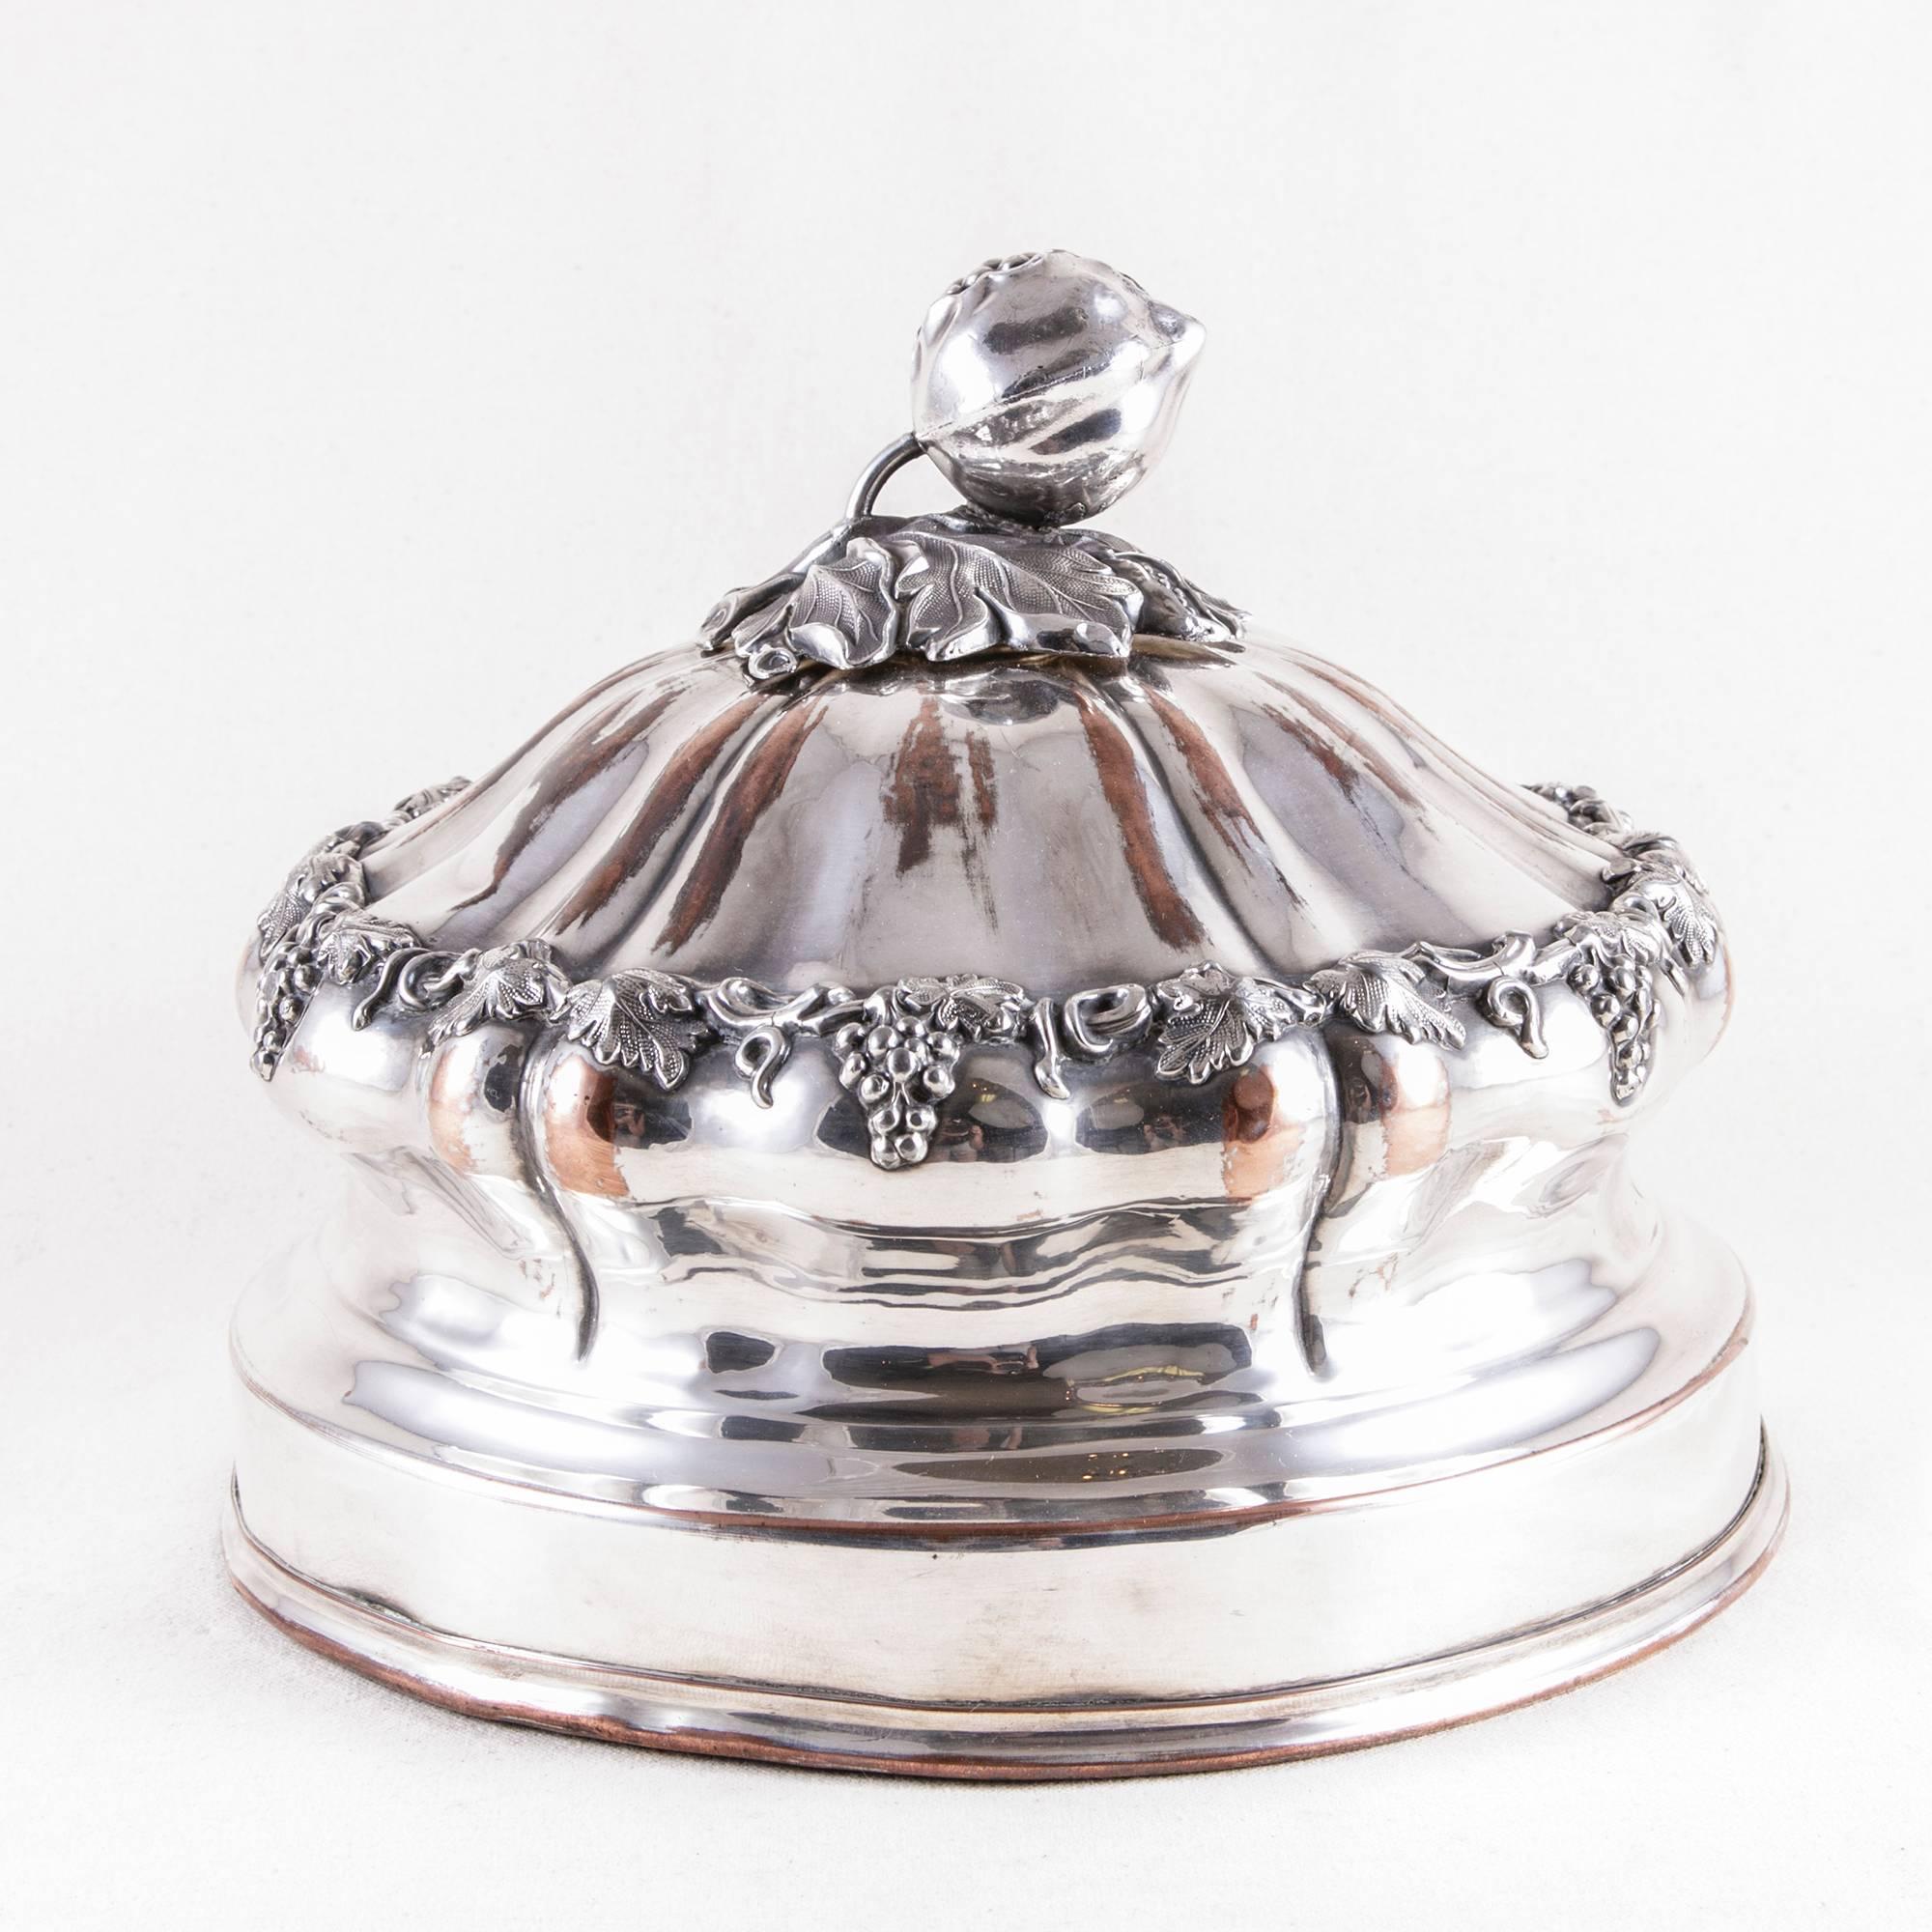 Silver Plate 19th Century French Silver Hotel Dome Serving Piece Food Warmer Dish Cover